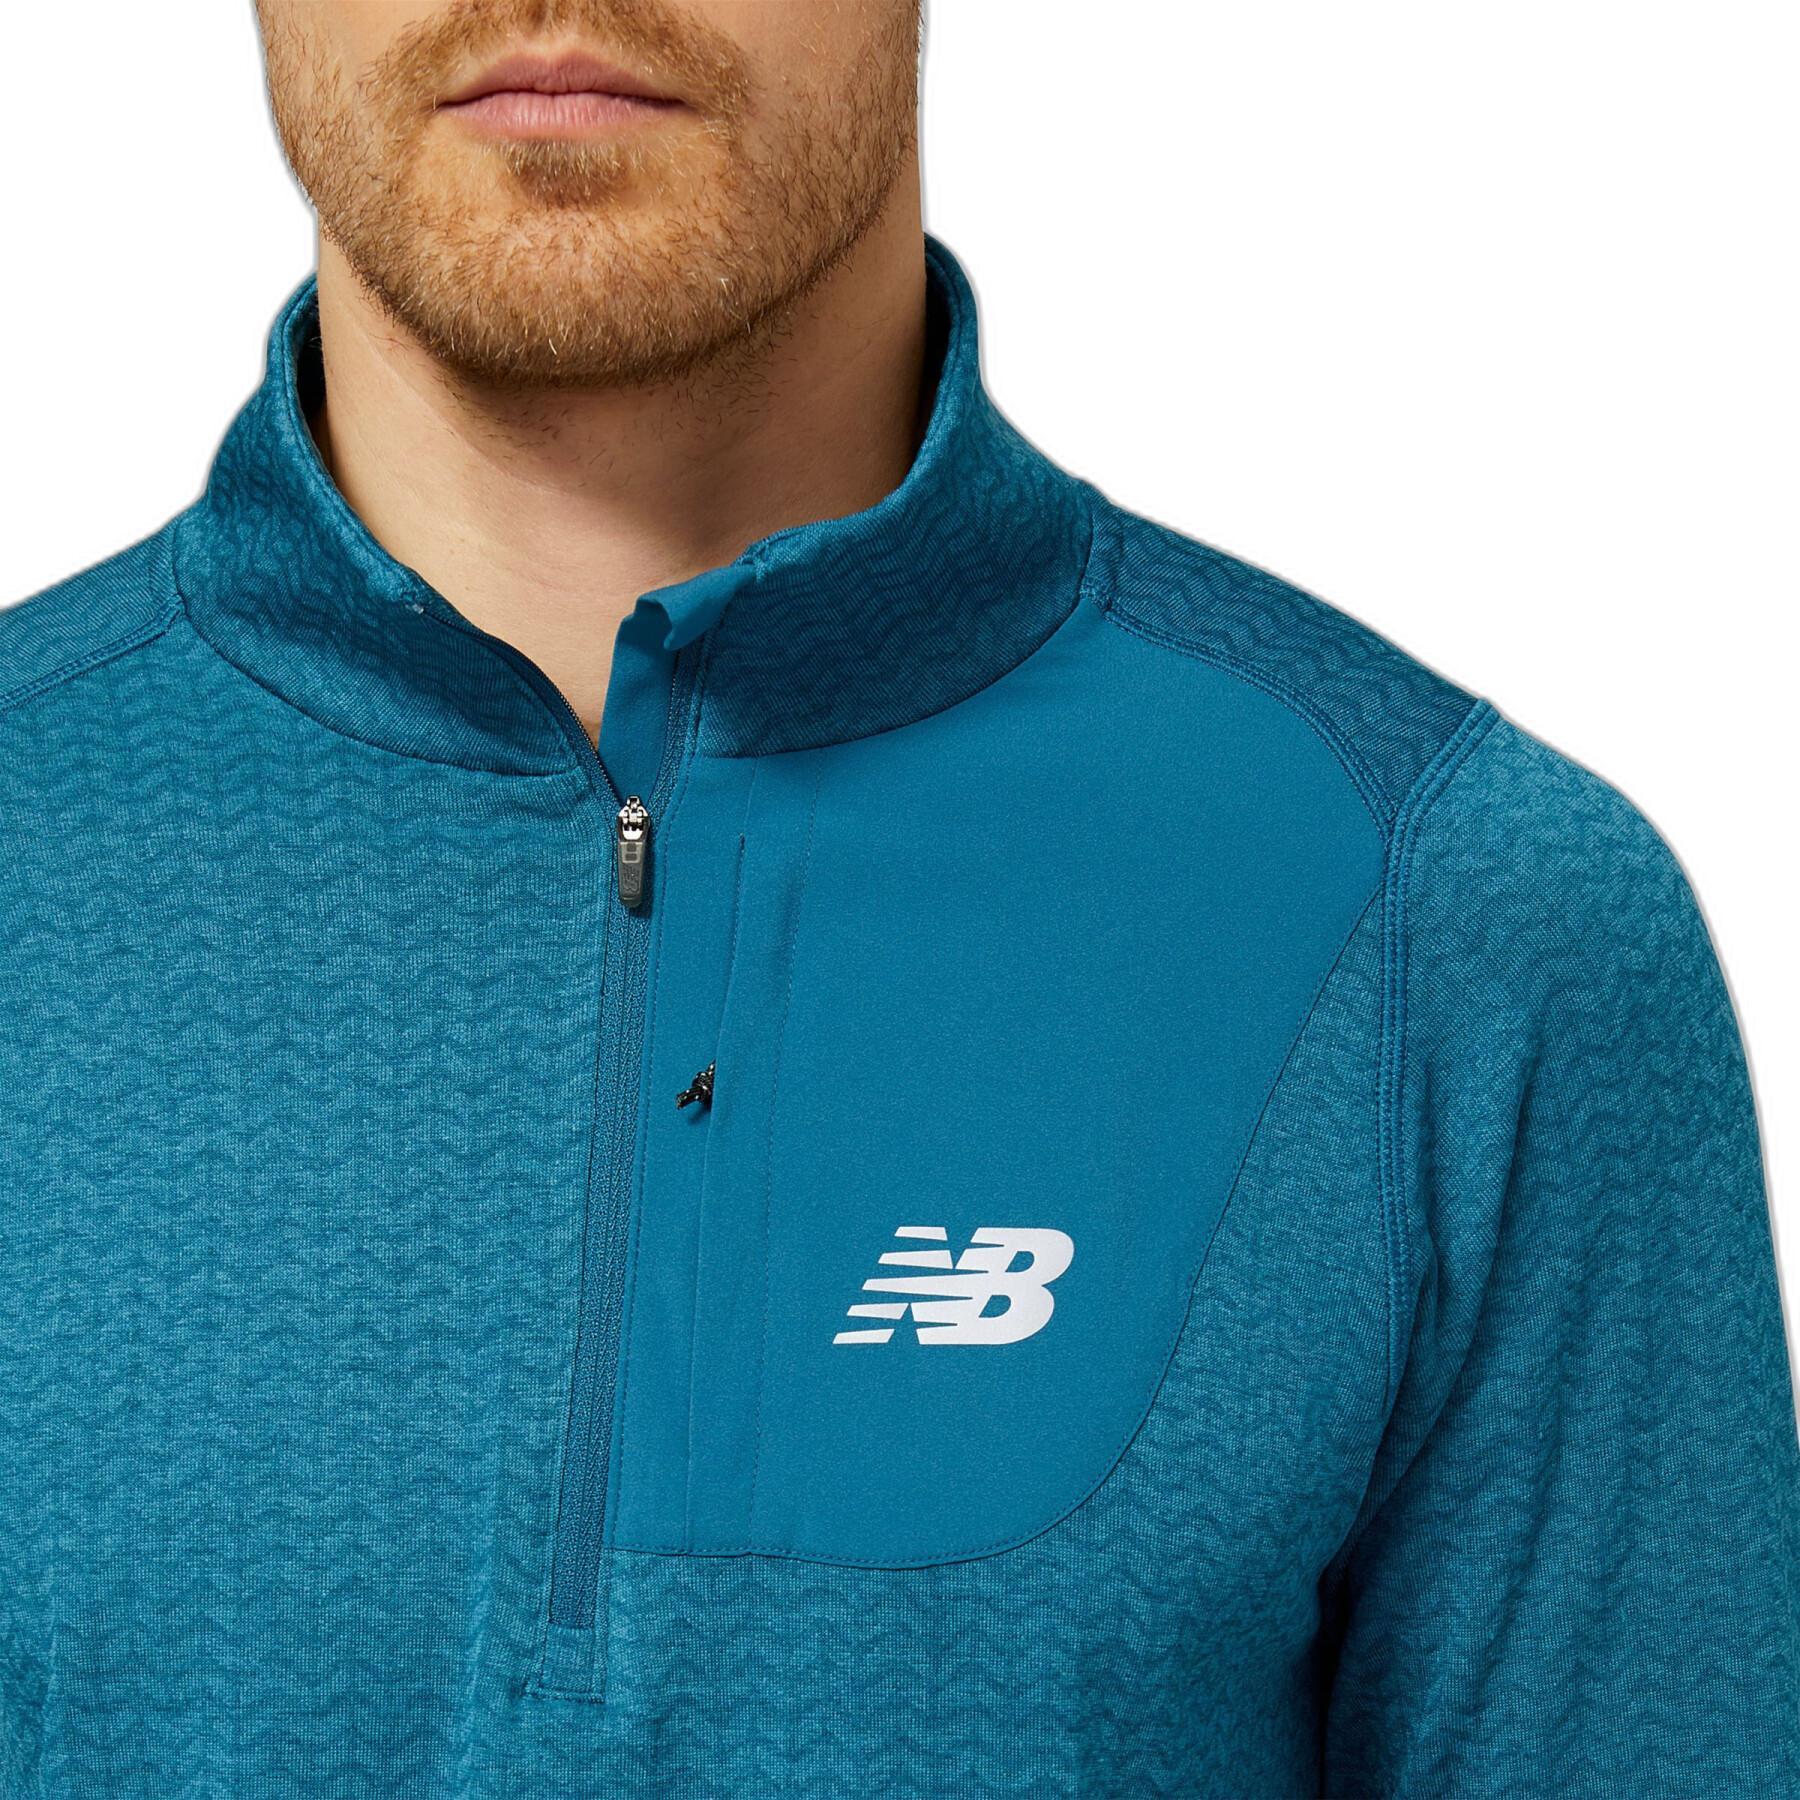 Maillot manches longues 1/2 zip New Balance Heat Grid